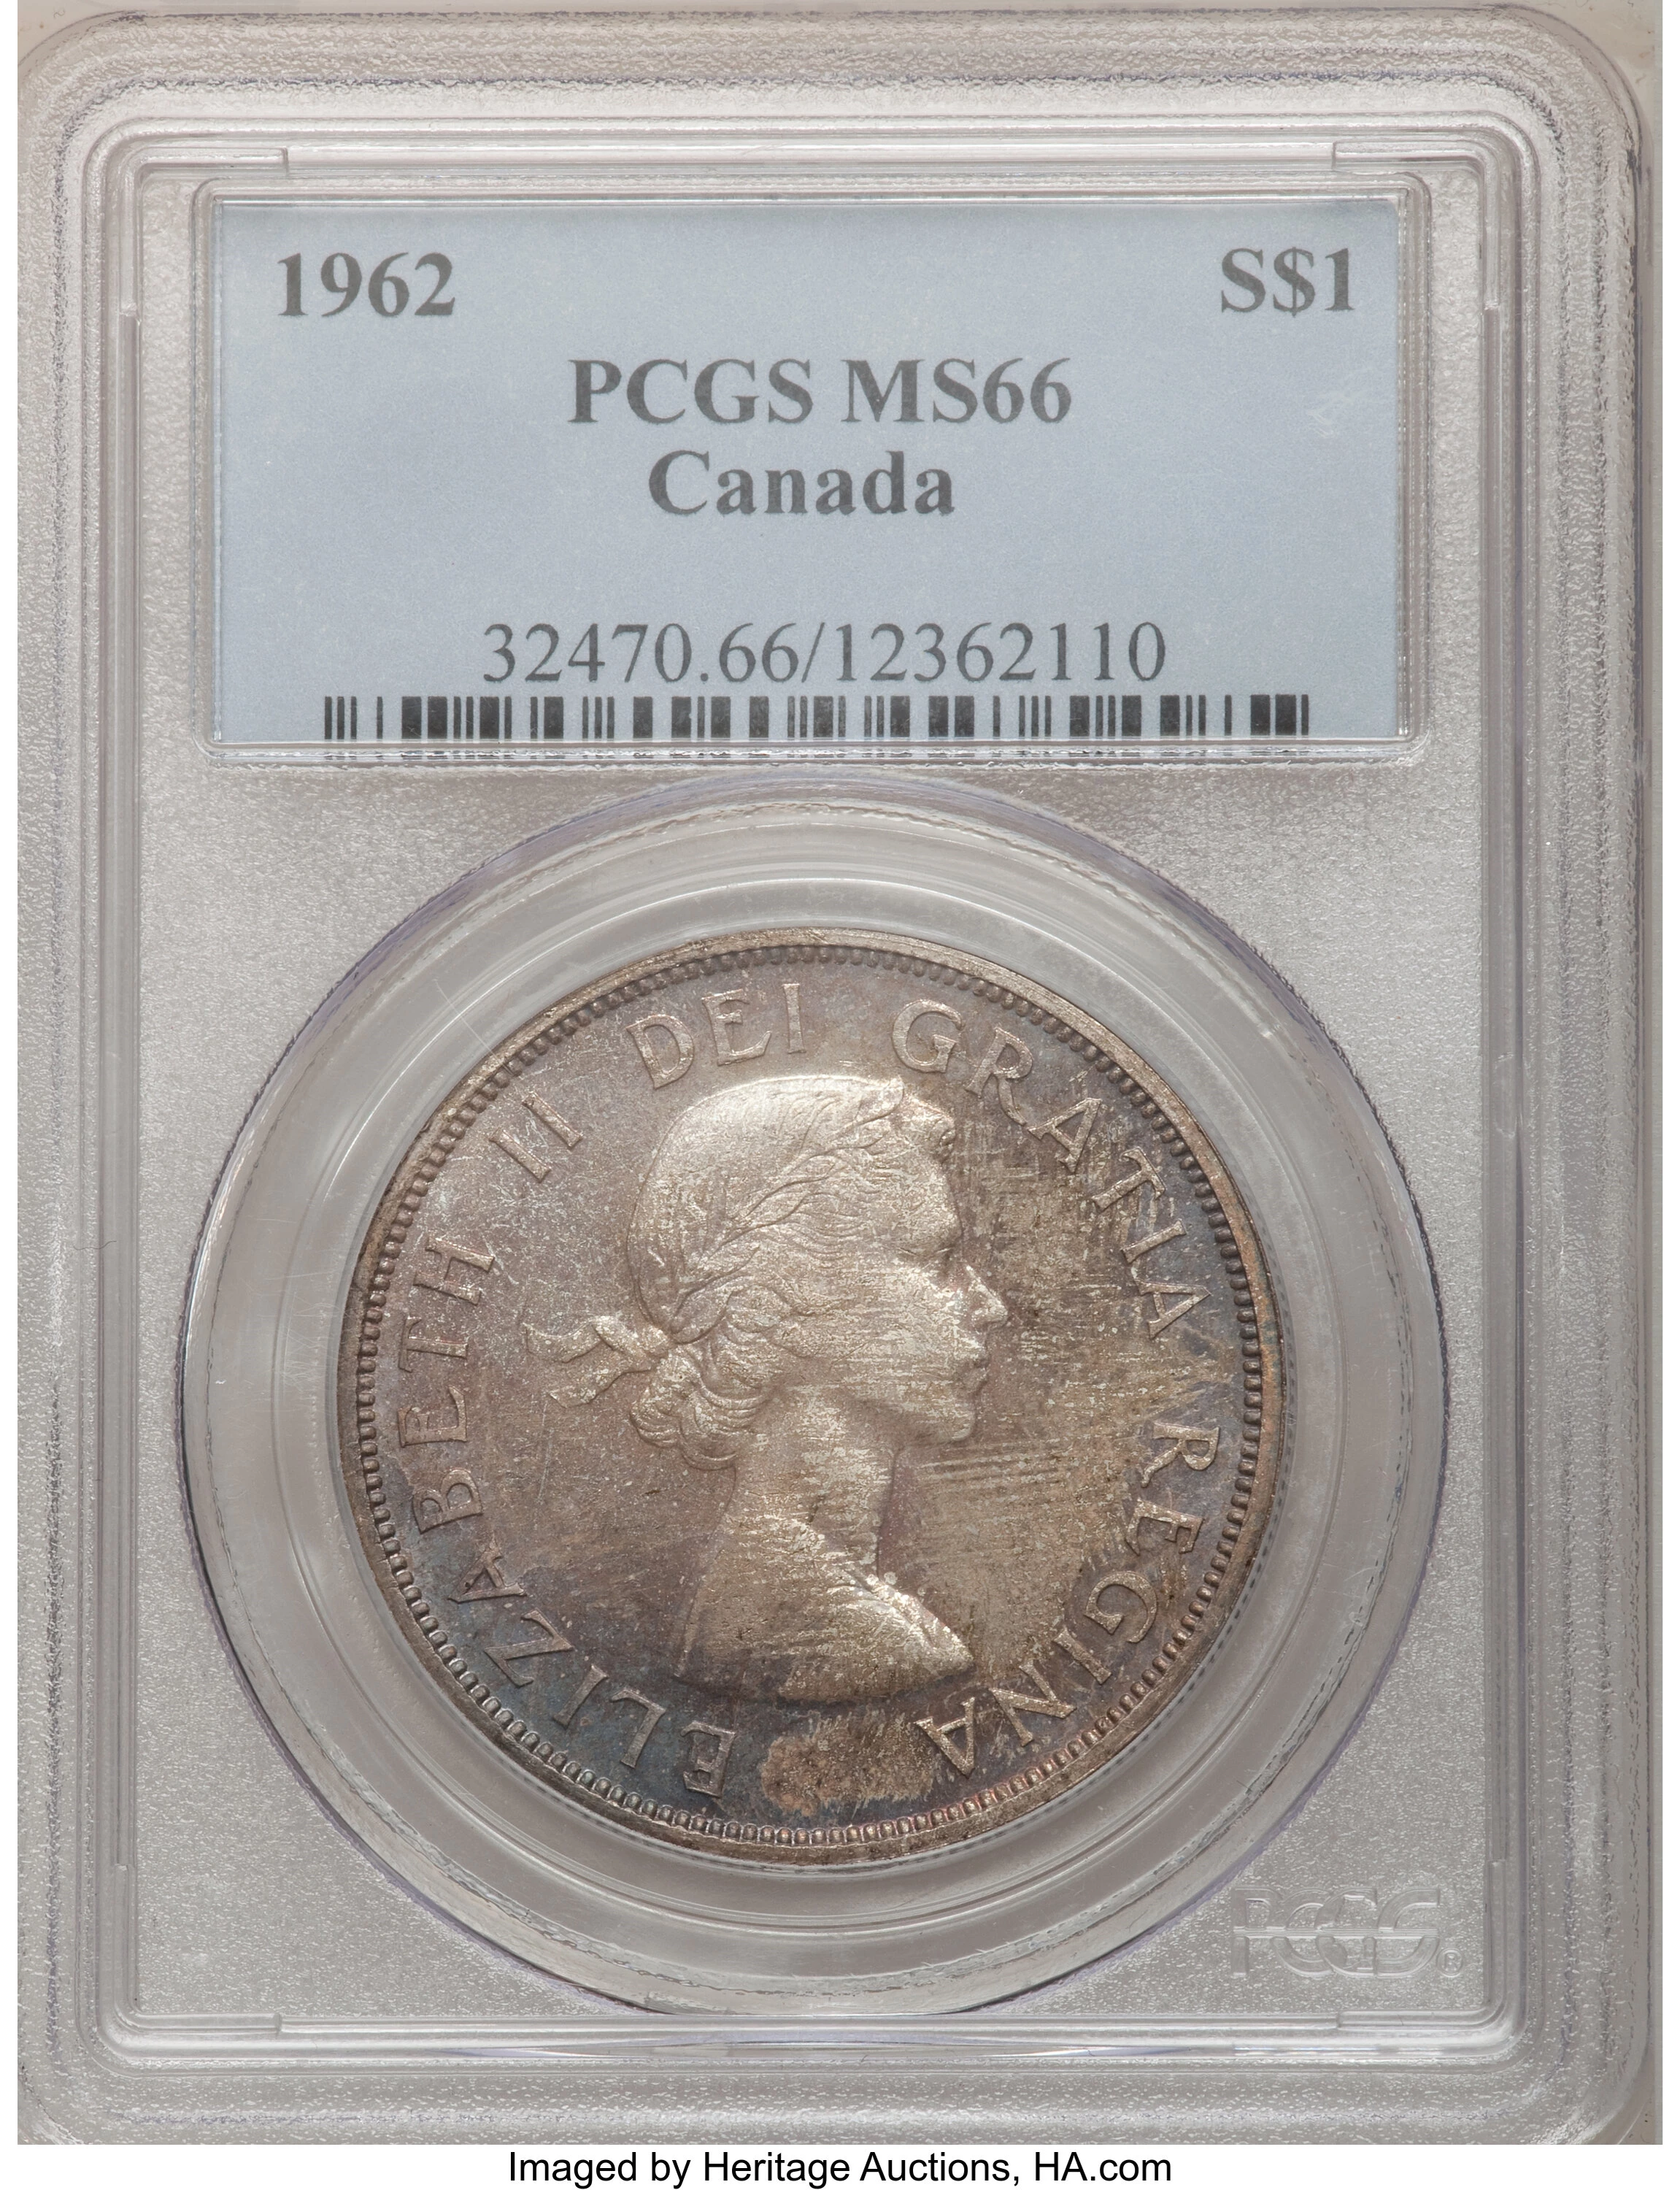 1962 Canada One Cent PCGS PL-65 RD, Buy 3 Items, Get $5 Off!!